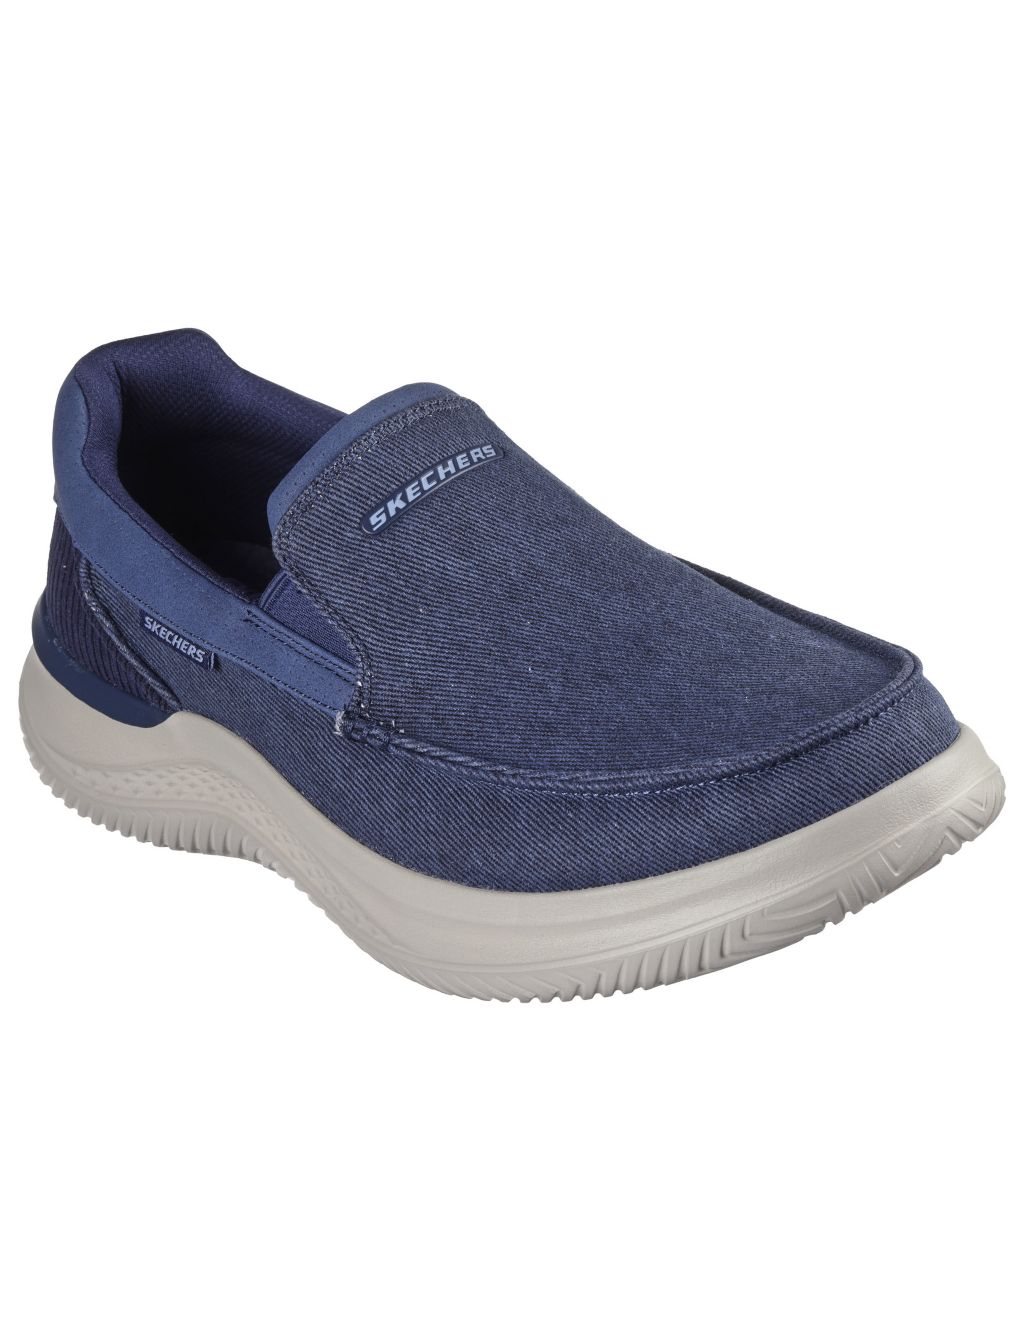 Hasting Fielden Slip-On Trainers 1 of 5